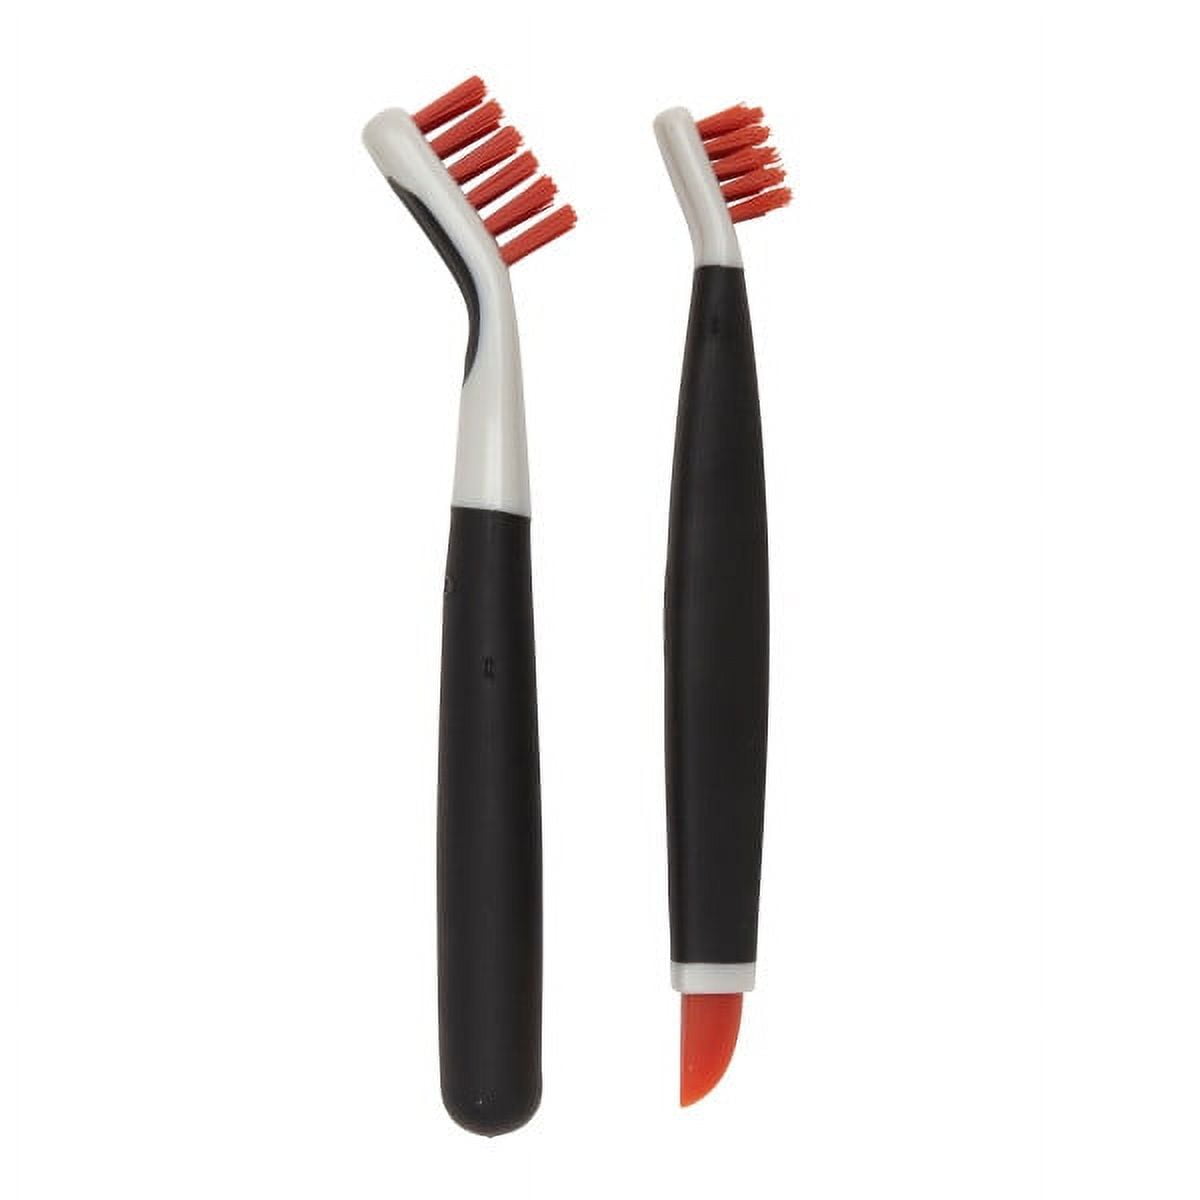  OXO Good Grips Cleaning Brush for Electronics 12cm